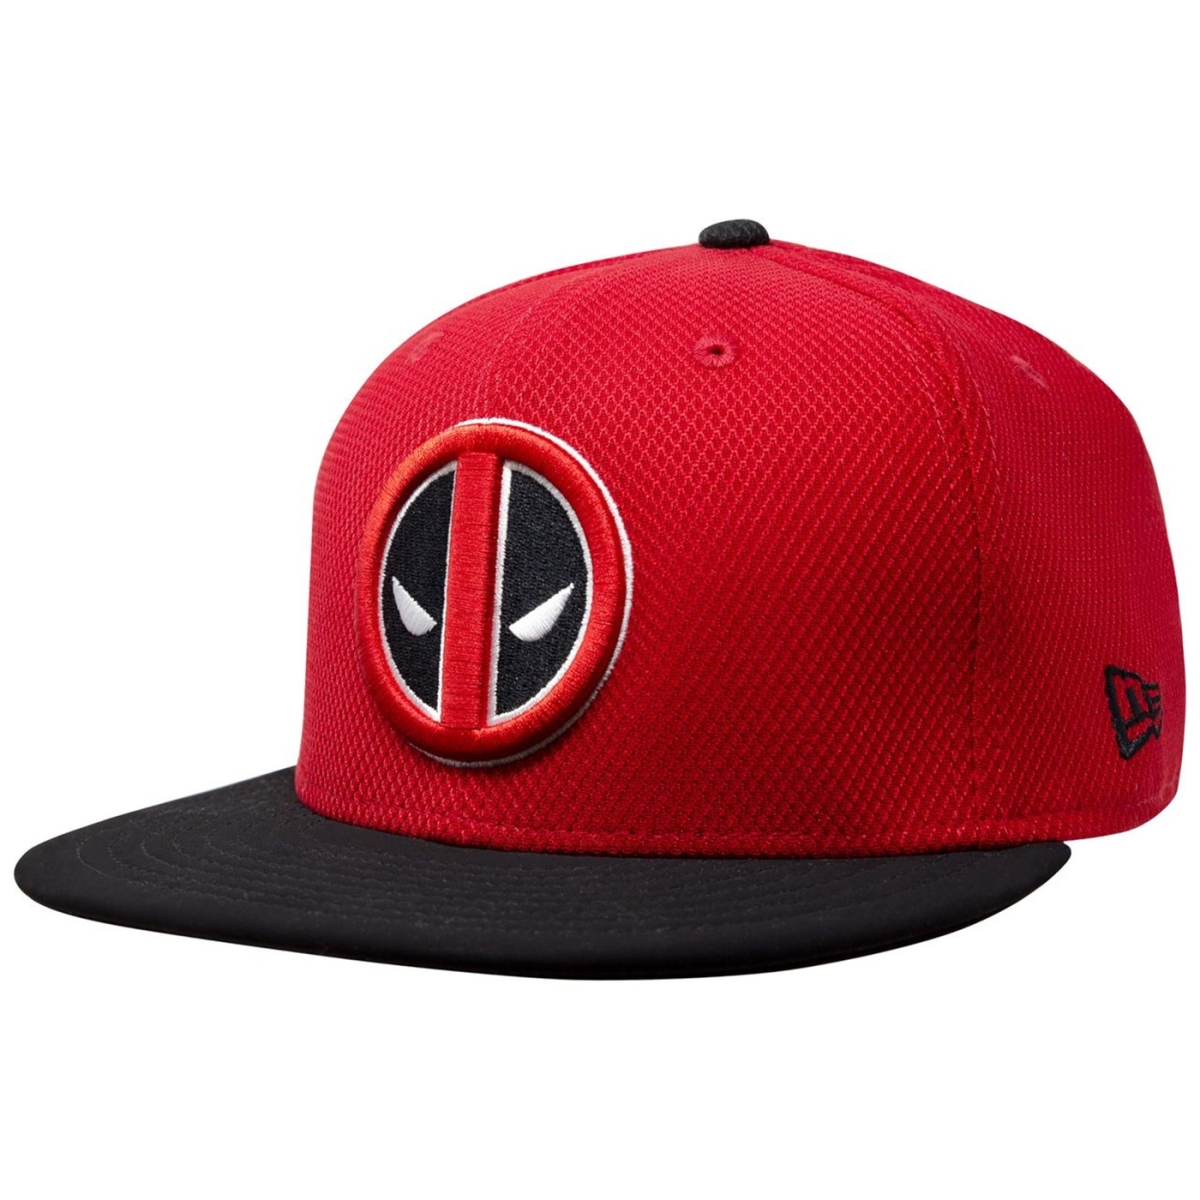 Picture of Deadpool hatdpsymrb5950-778-7 7-8 Fitted Deadpool Symbol Red & Black 59Fifty Fitted Hat - Size 7.875